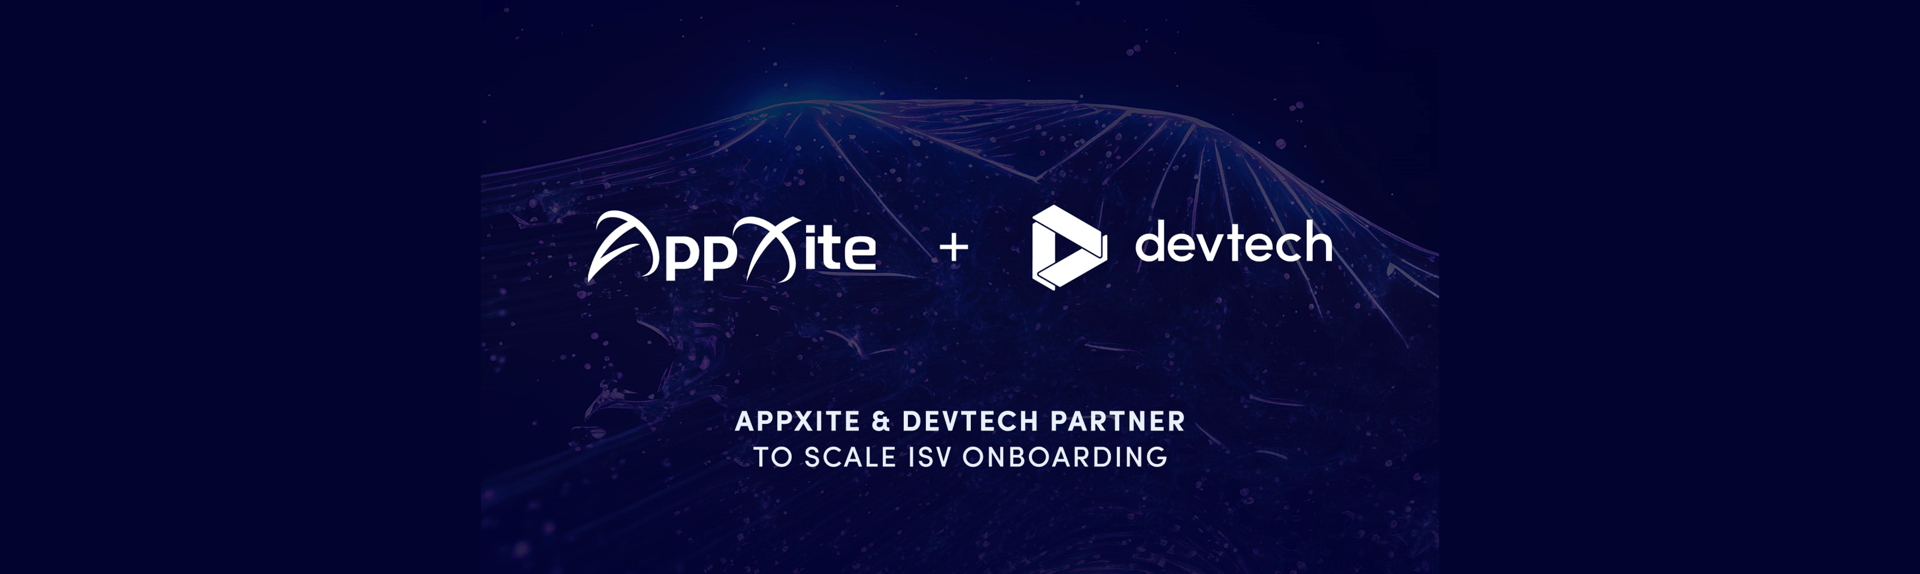 AppXite and Devtech partner to help accelerate ISV onboarding